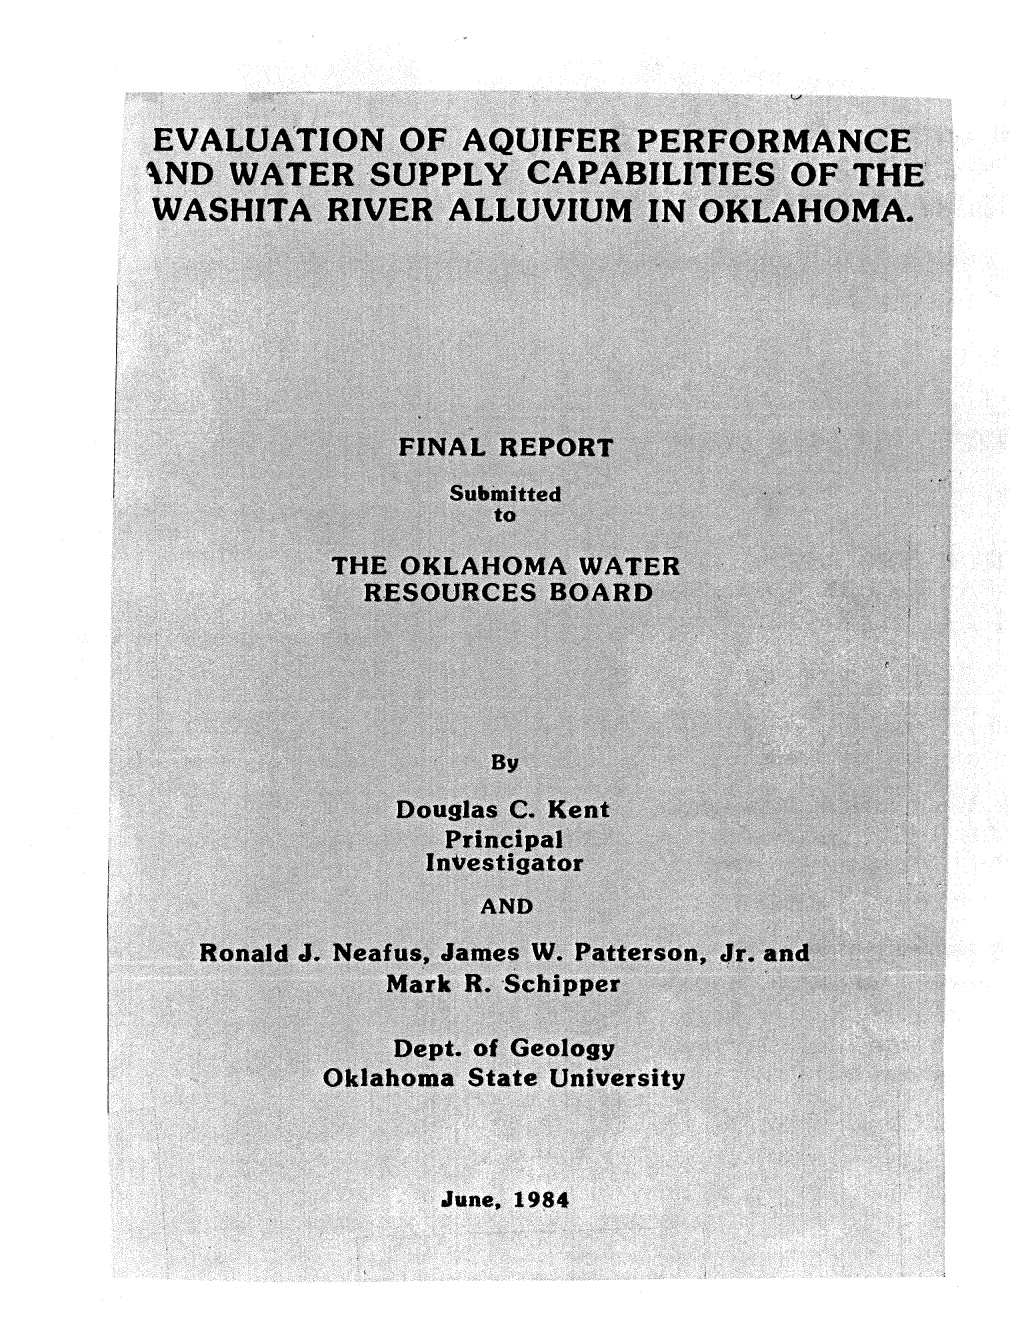 Evaluation of Aquifer Performance and Water Supply Capabilities of the Washita River Alluvium in Oklahoma